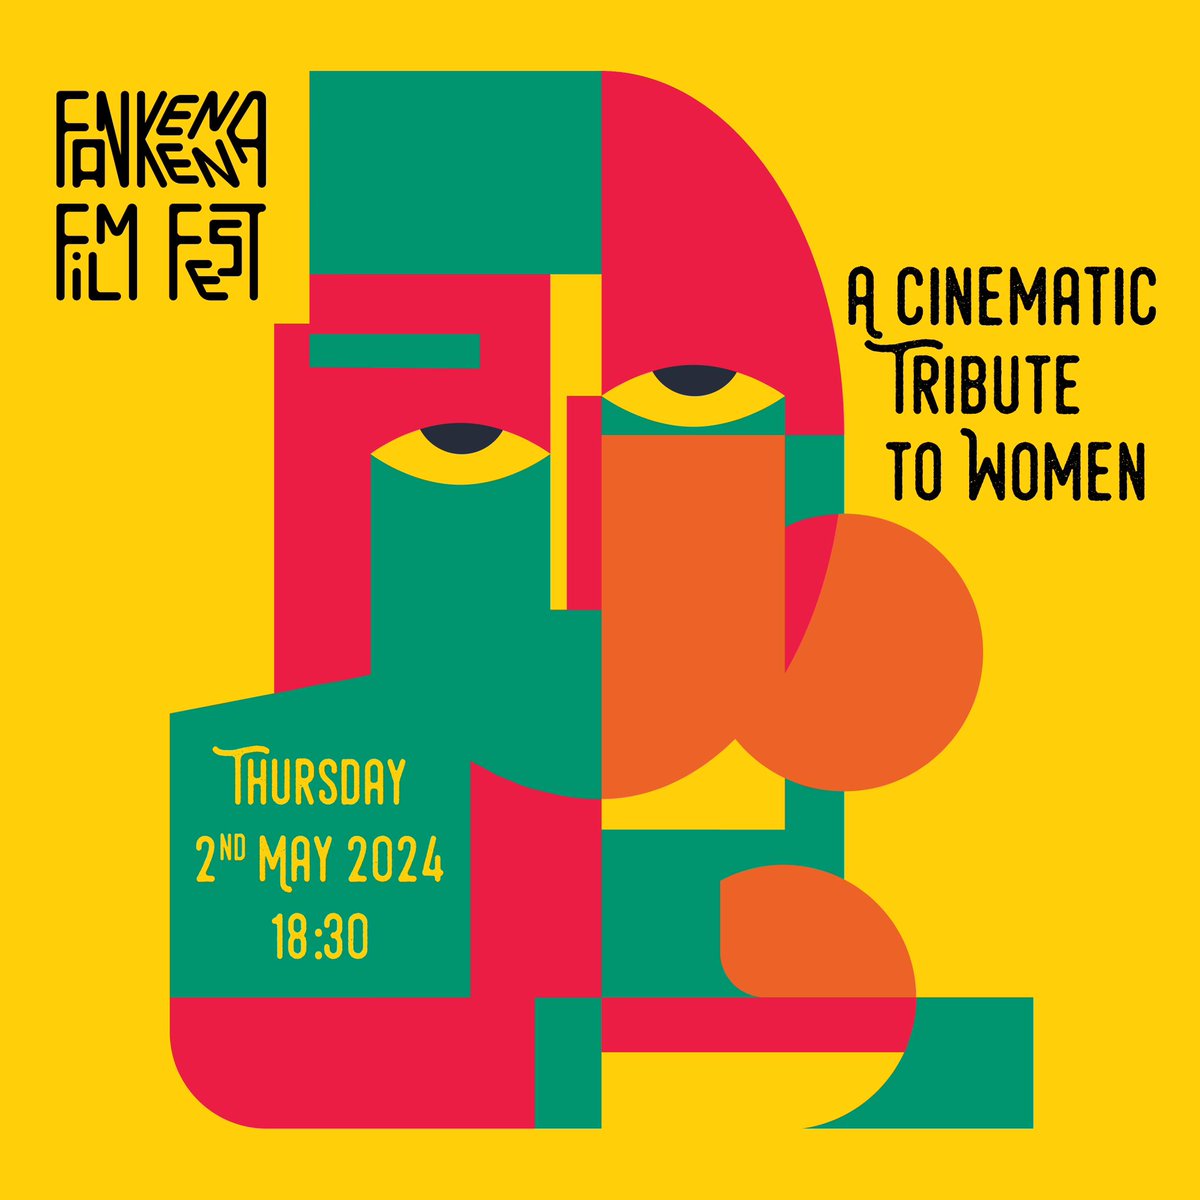 UPDATE: We have changed our upcoming film festival screening to May 2nd instead. FANKEENNA is moving to the building next door that used to be Spark’s office. We apologize for any inconvenience and are excited to welcome you at our new location! #FankeennaFilmFest @MoviesMatter